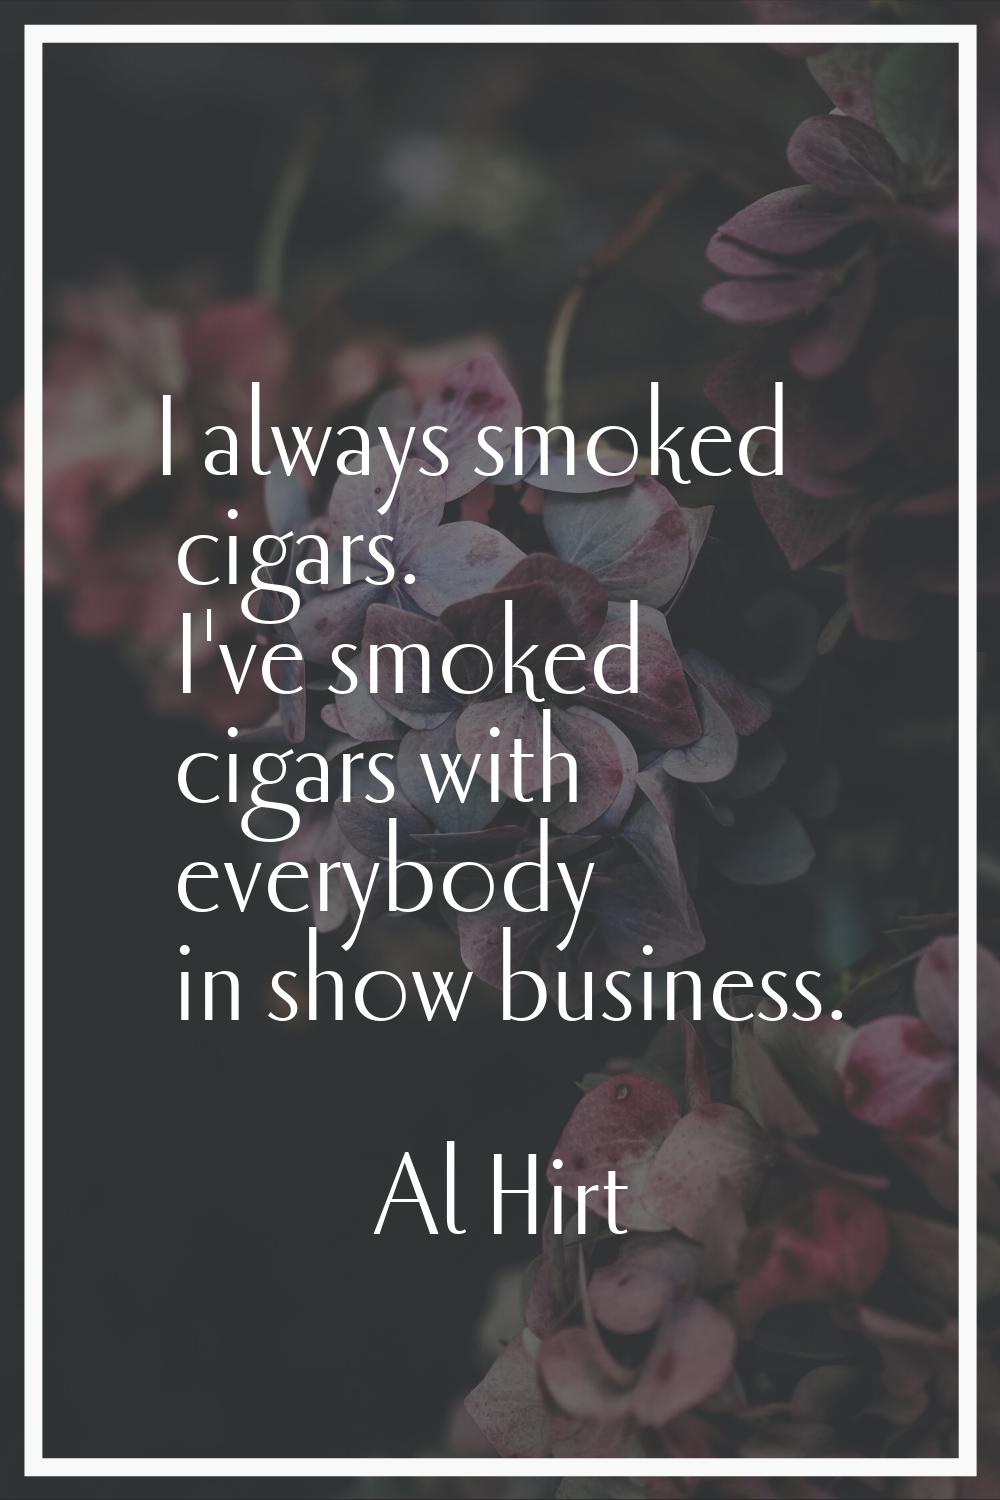 I always smoked cigars. I've smoked cigars with everybody in show business.